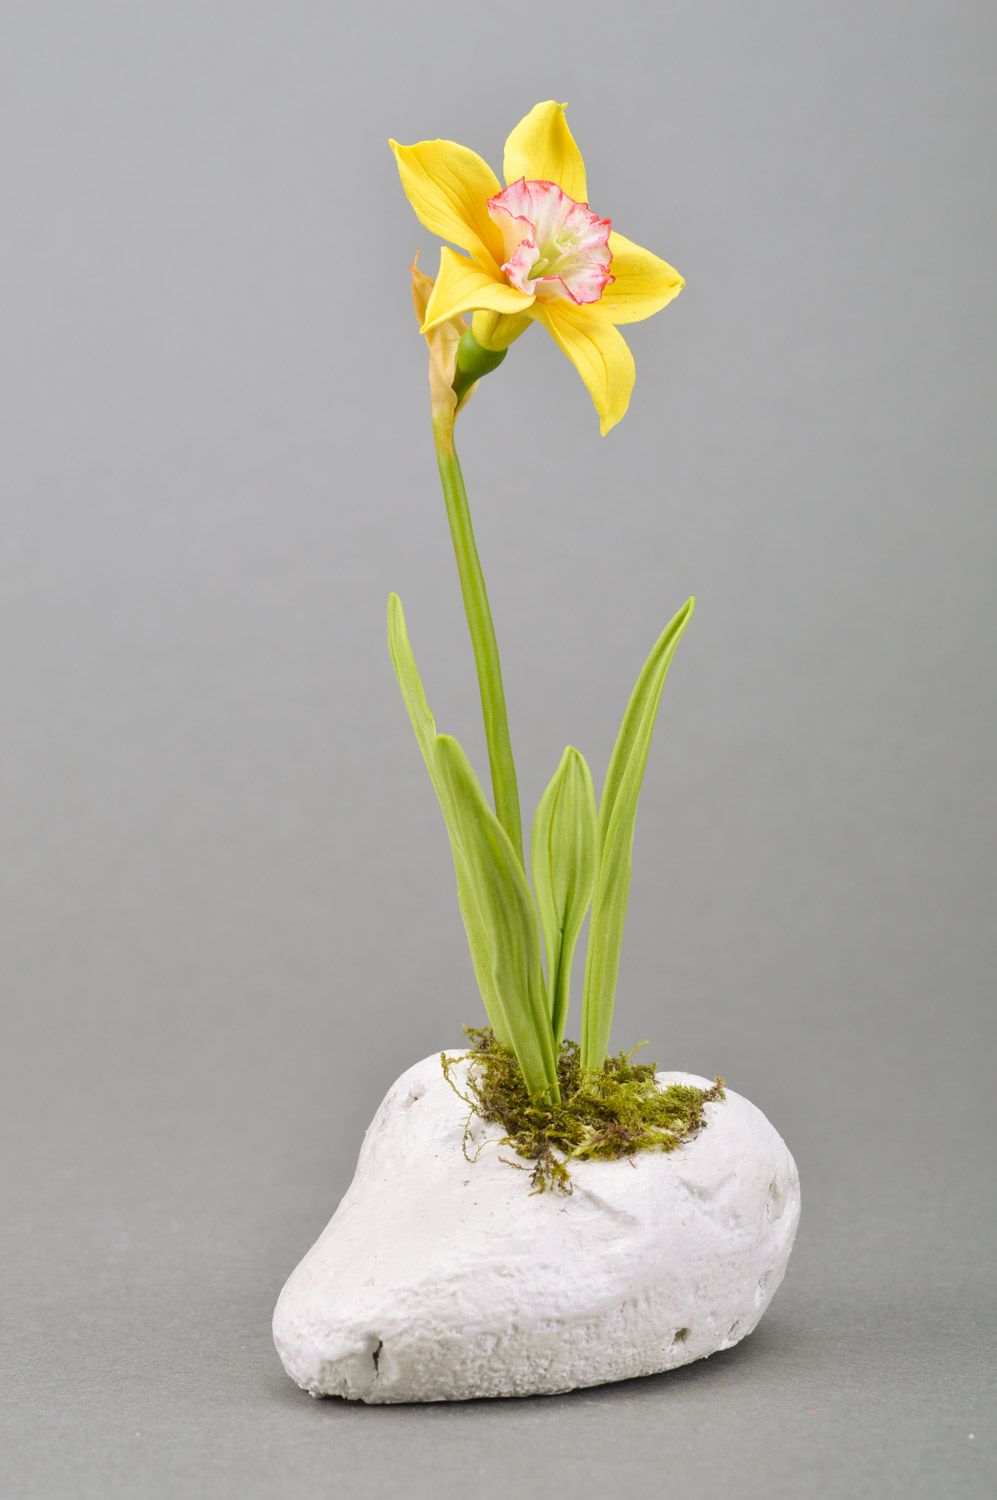 Handmade decorative yellow narcissus flower molded of polymer clay on stone basis photo 1